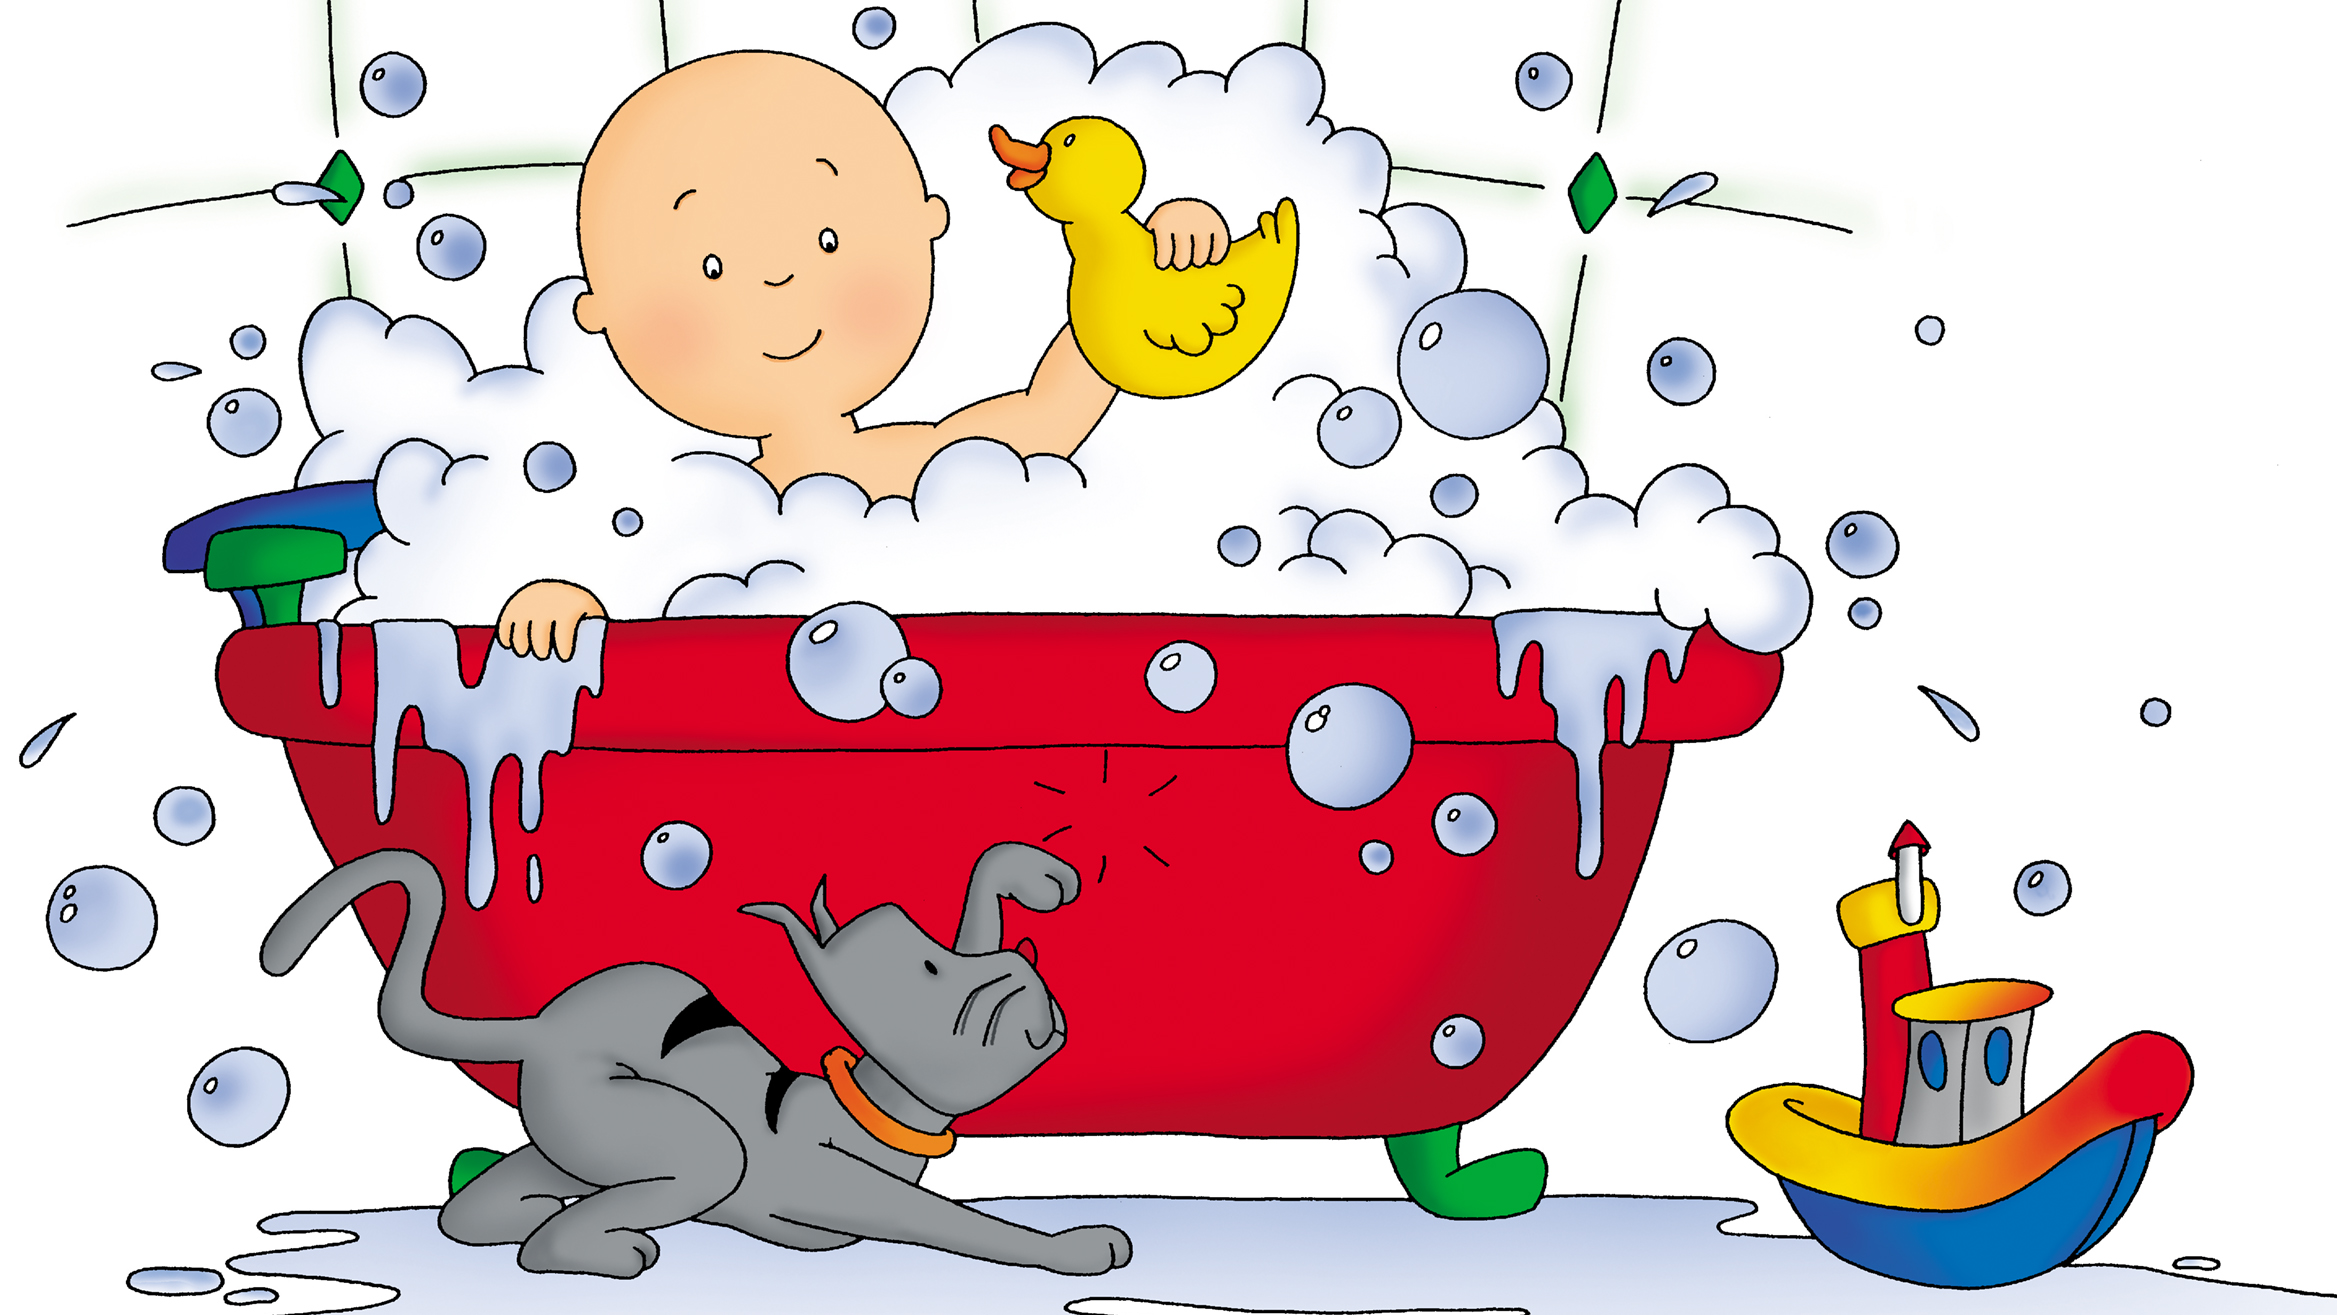 A young, bald boy holding a yellow duck and sitting in a red bathtub full of soap bubbles.